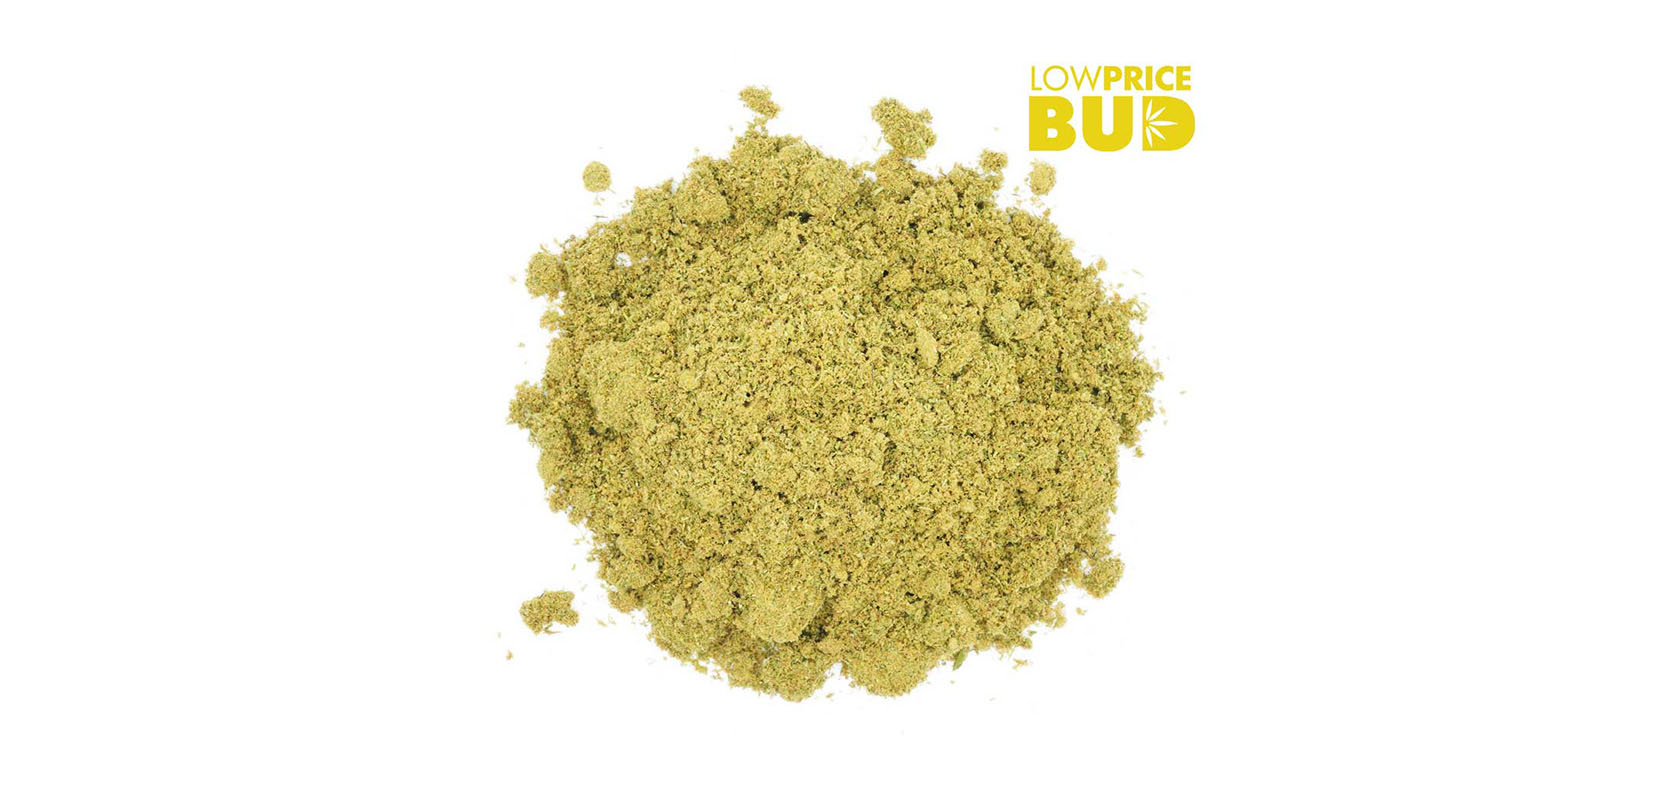 Kief and dry sift for sale from online dispensary low price bud. buy weed online. buy weed concentrates online.